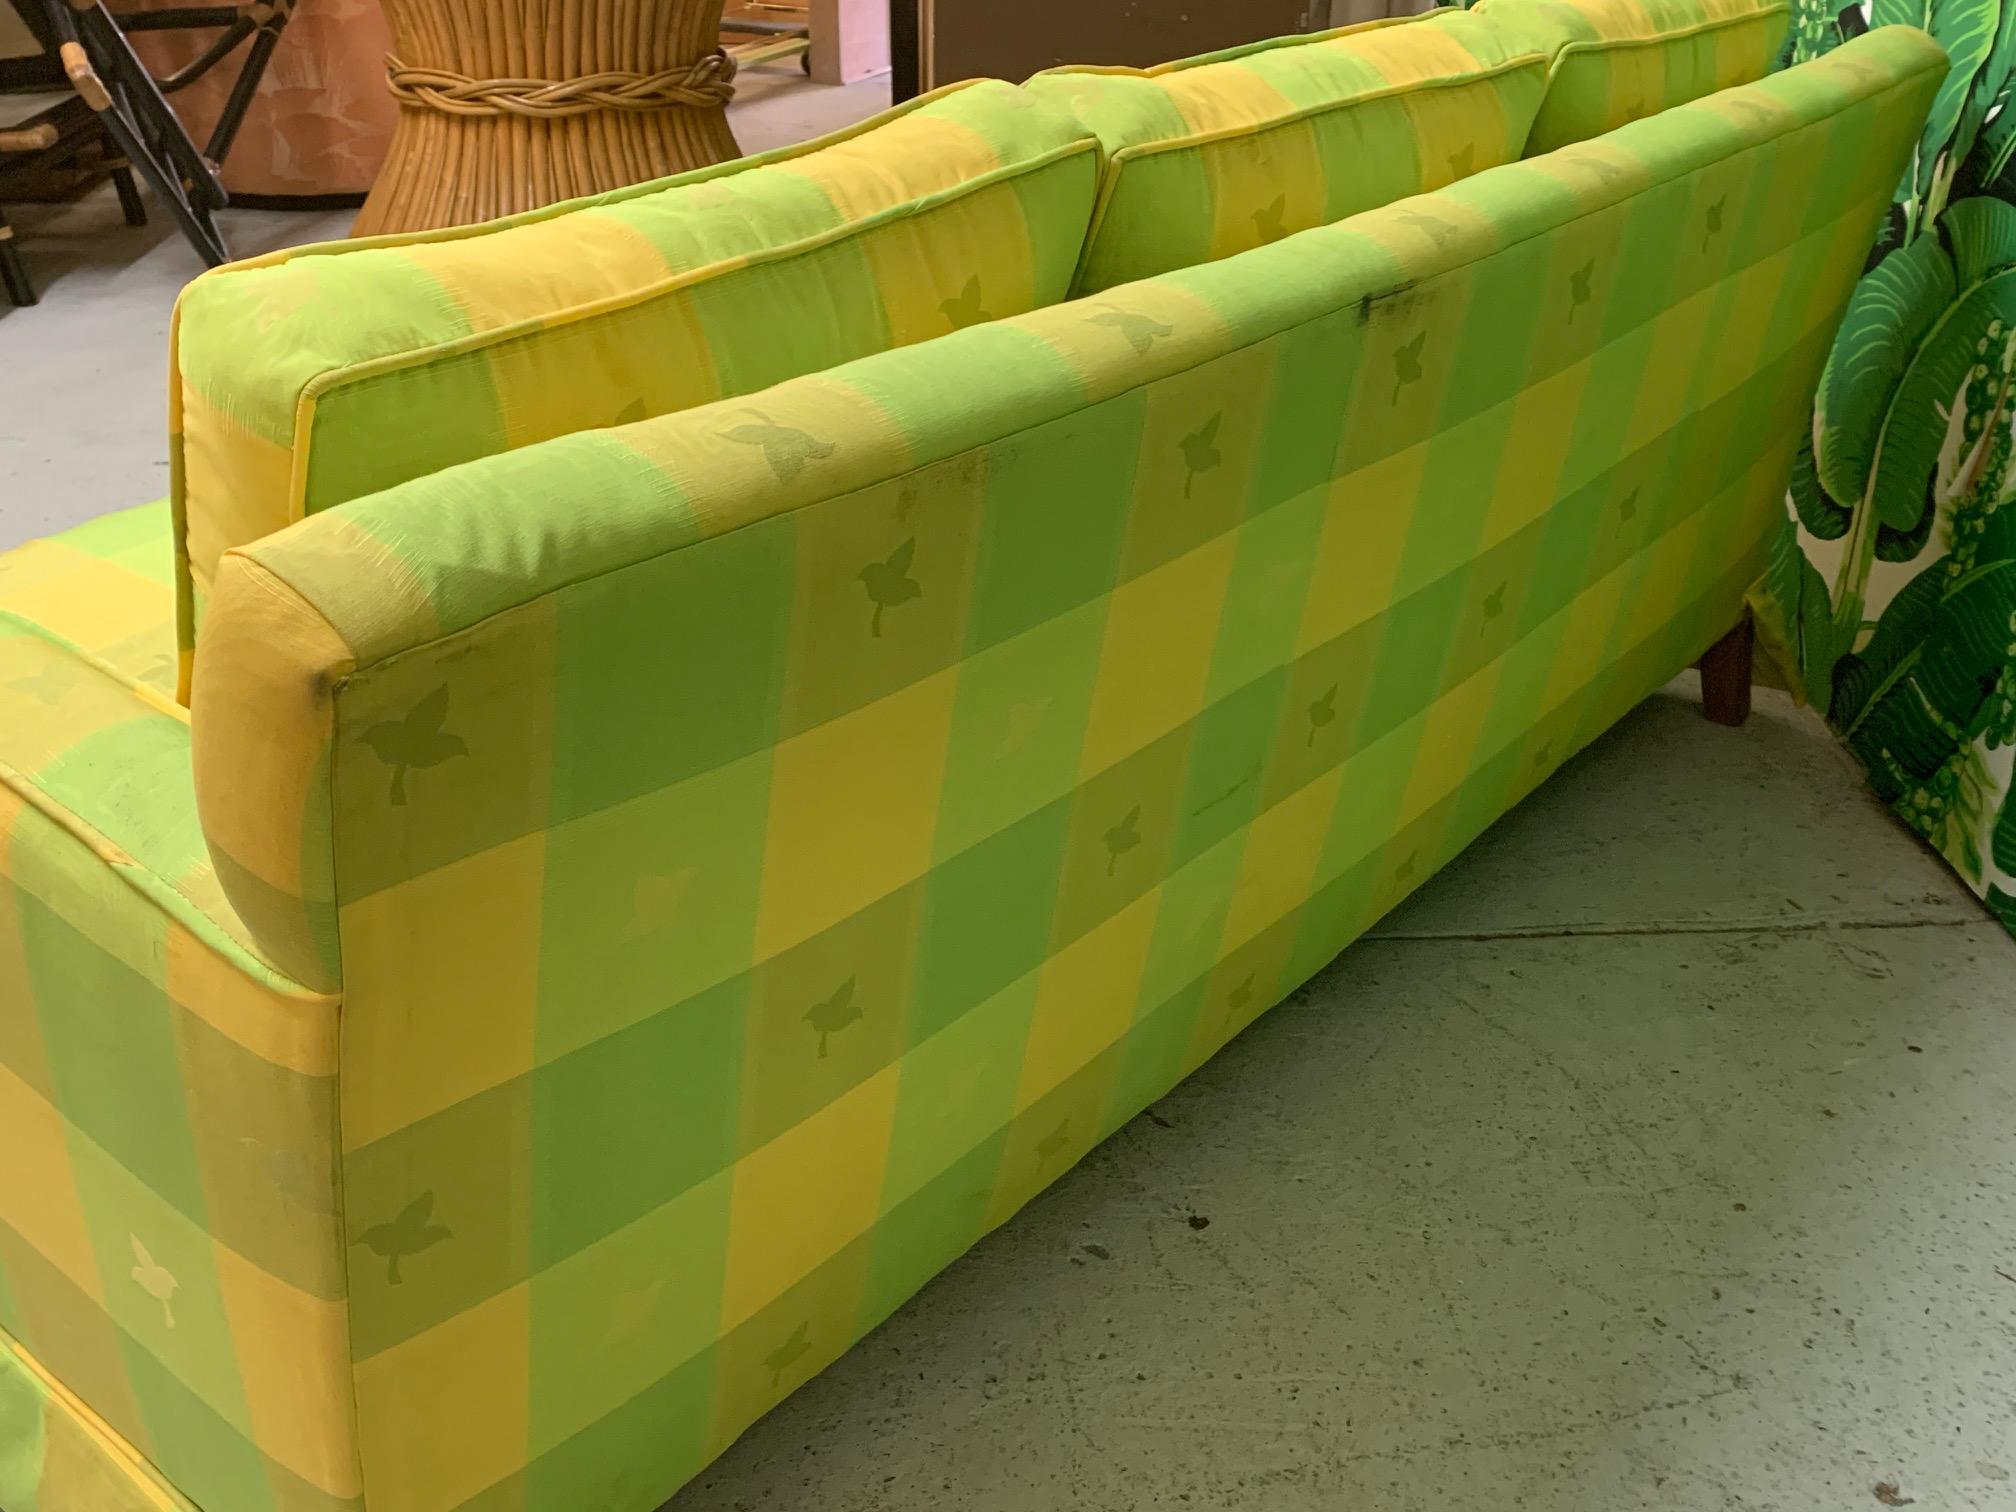 Hollywood Regency Vintage Plaid Sofa in the Style of Dorothy Draper